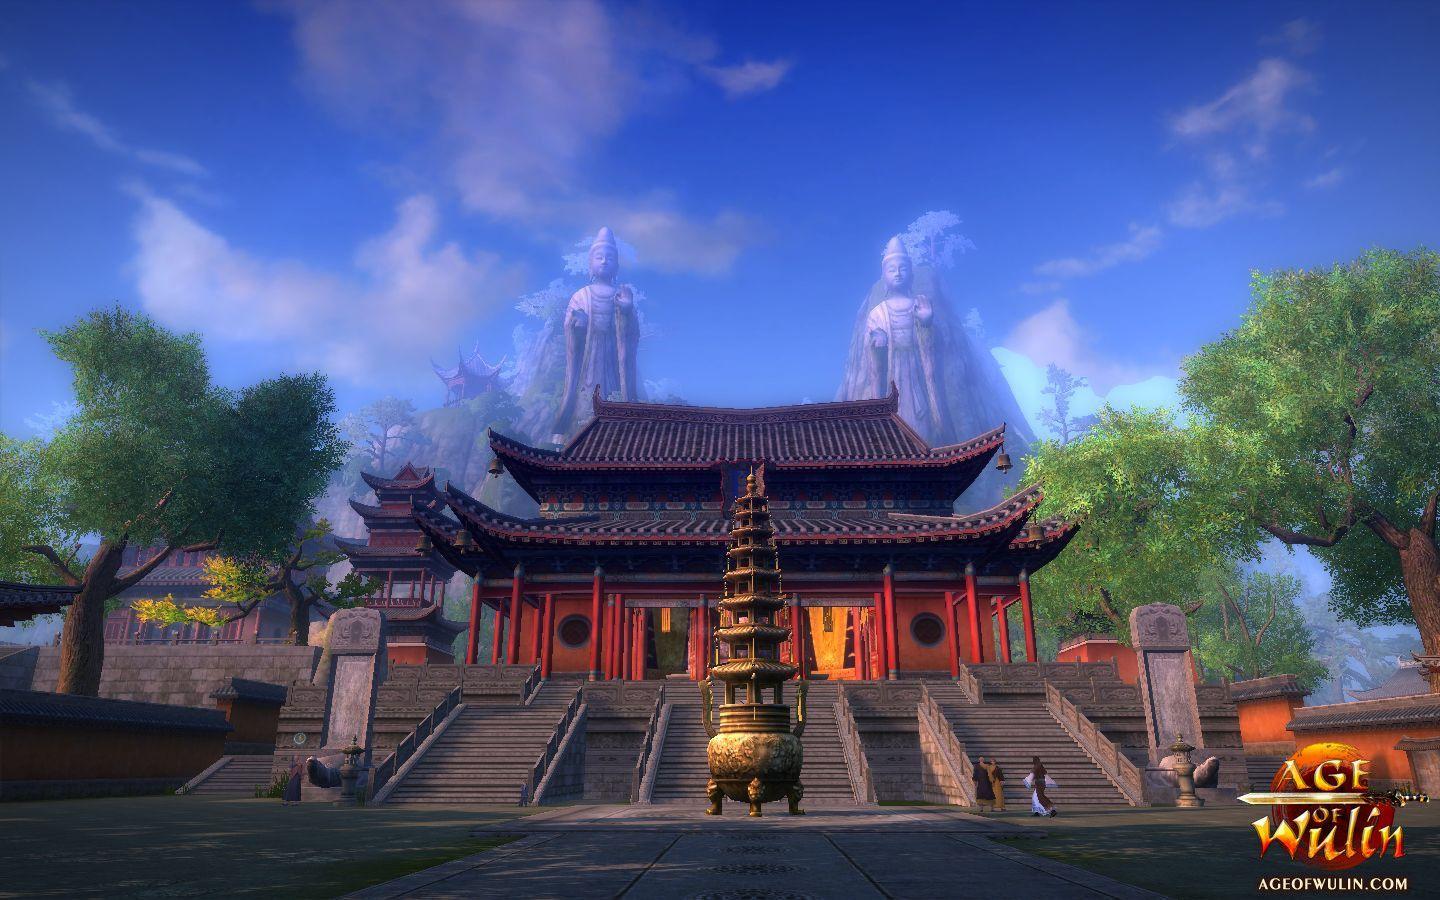 Age of Wulin Shaolin to Play Martial Arts MMORPG